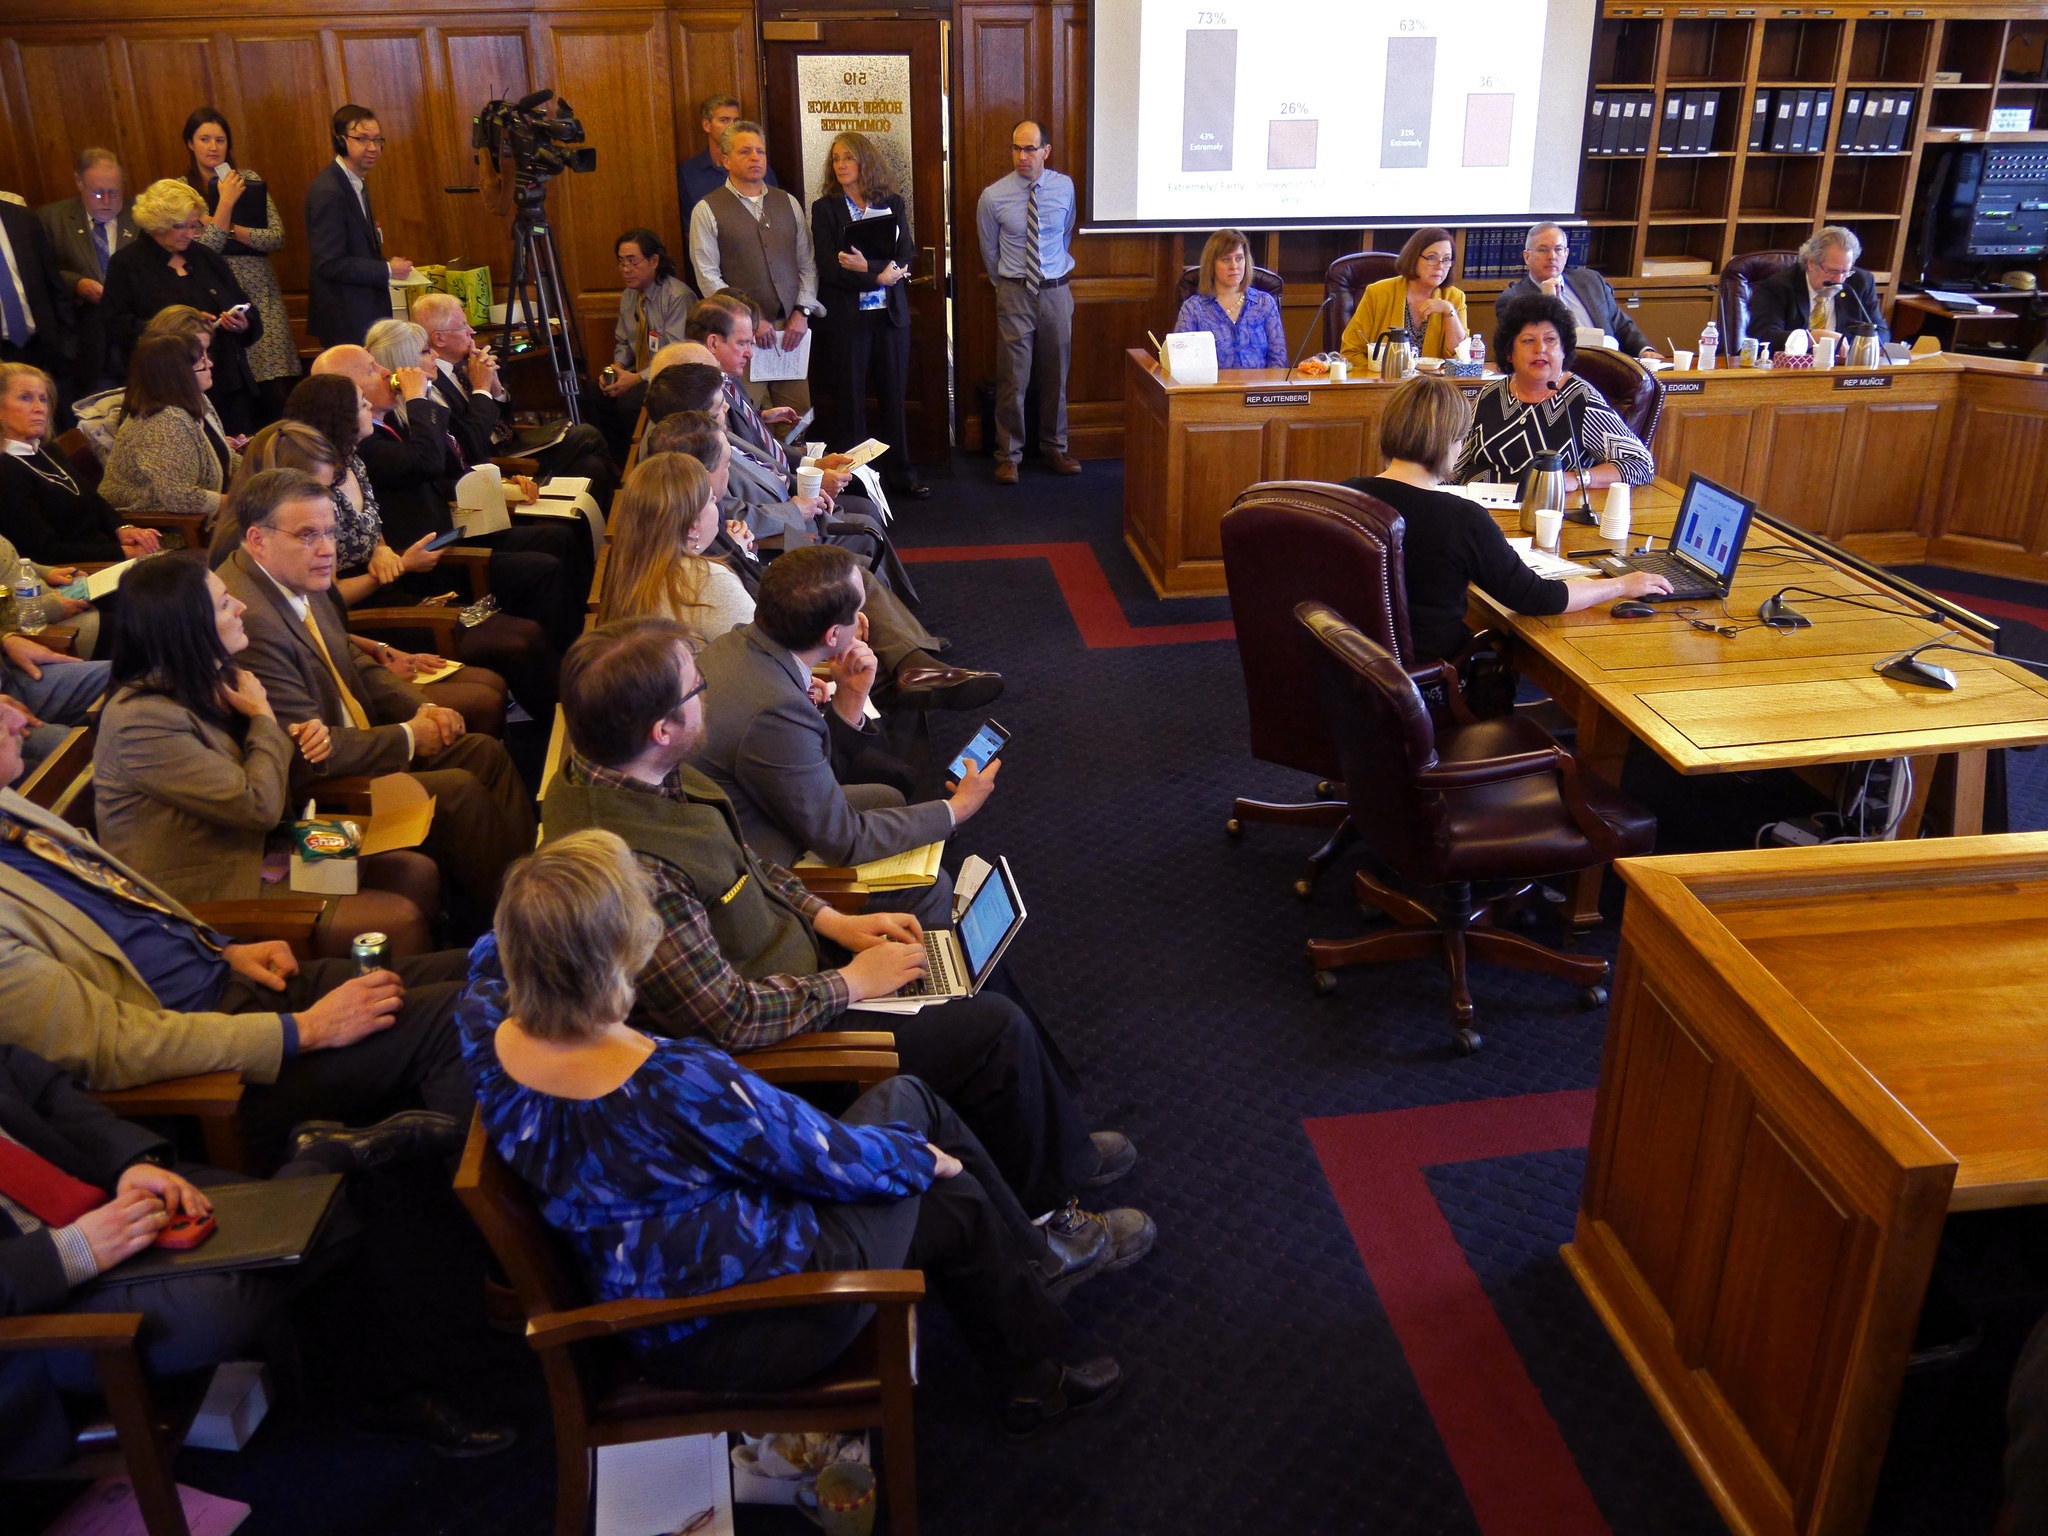 Diane Kaplan, president and CEO, Rasmuson Foundation (at table facing camera) presents the results of a public survey to the House Finance Committee, January 20, 2016. The Rasmuson survey asked Alaskans what they think about the state’s fiscal crises. (Photo by Skip Gray/360 North.)